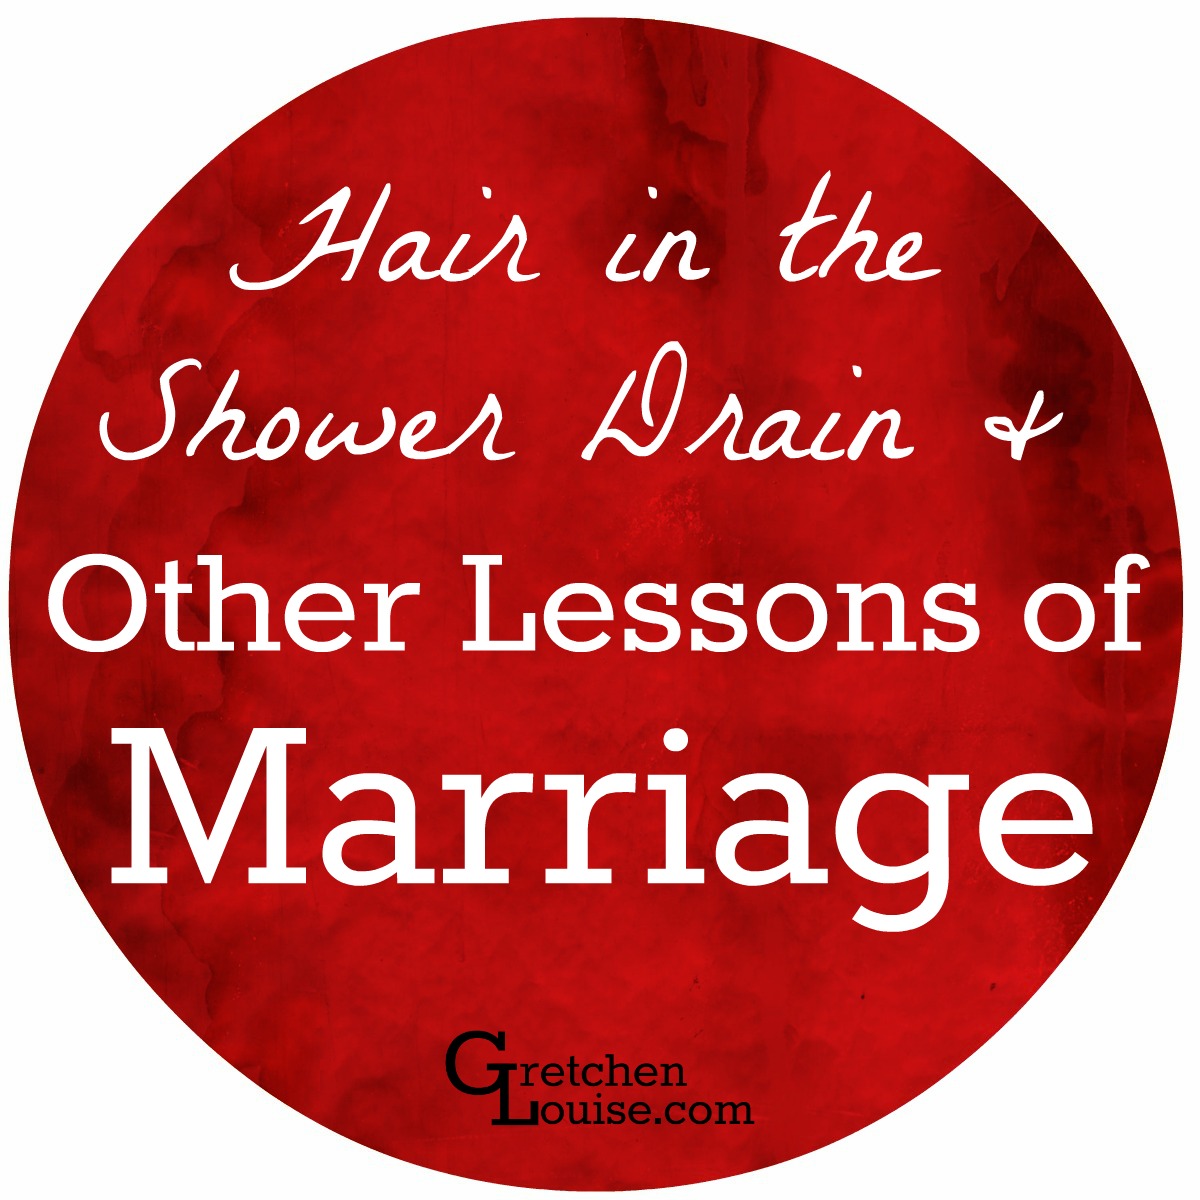 "Do you have any marriage advice for us?" they asked. And we told our story. Of hair in the shower drain. And other lessons of marriage.